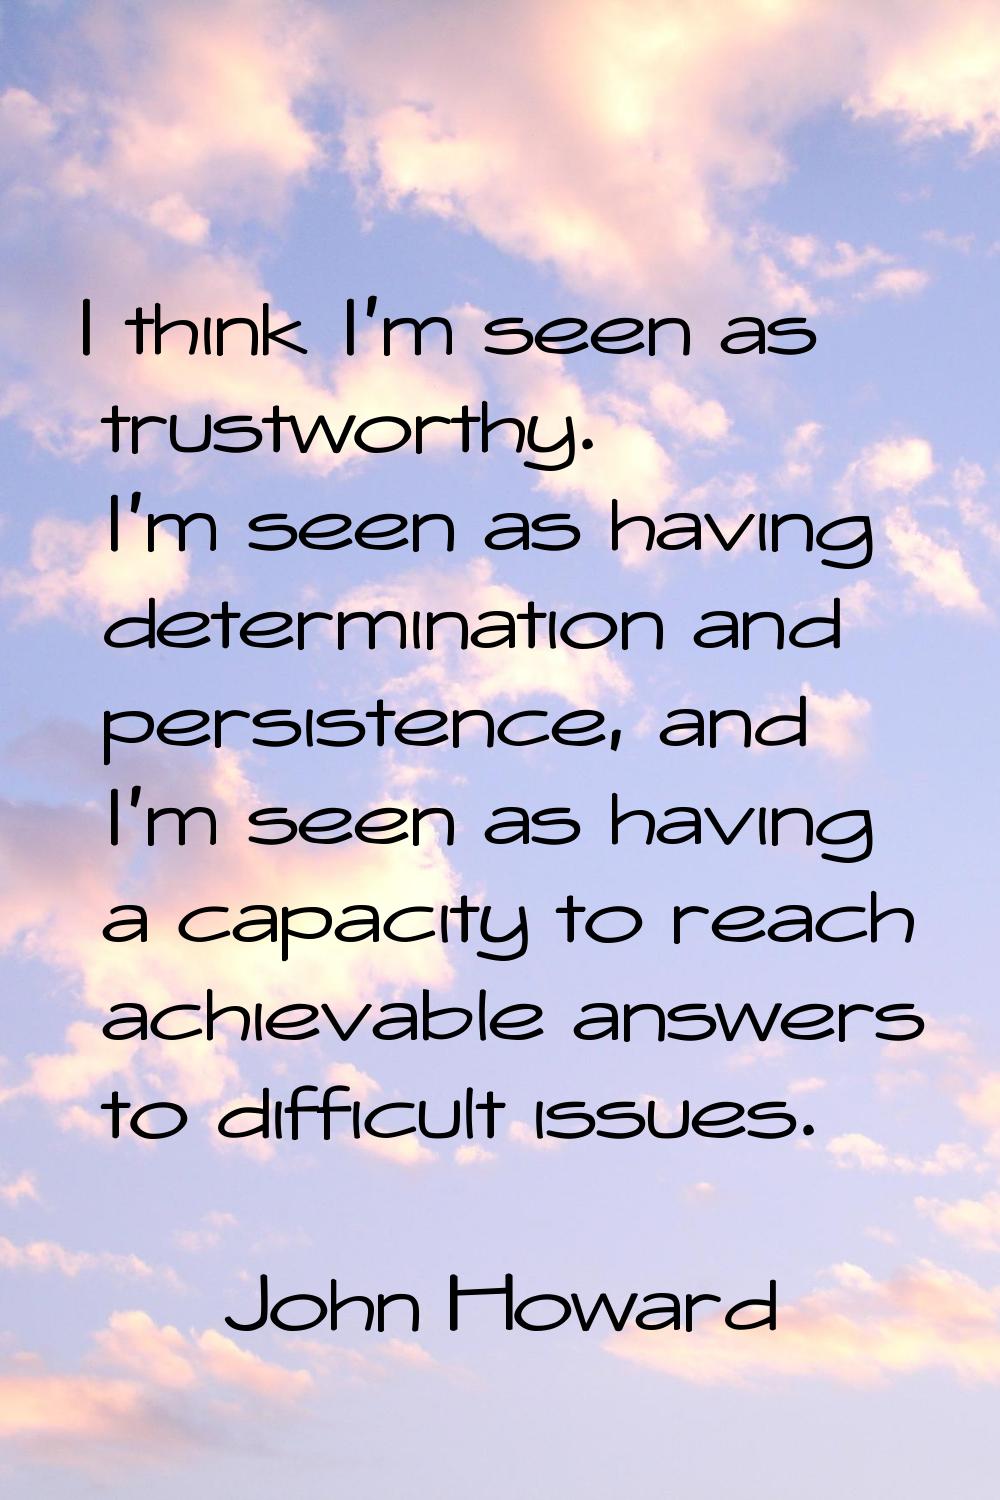 I think I'm seen as trustworthy. I'm seen as having determination and persistence, and I'm seen as 